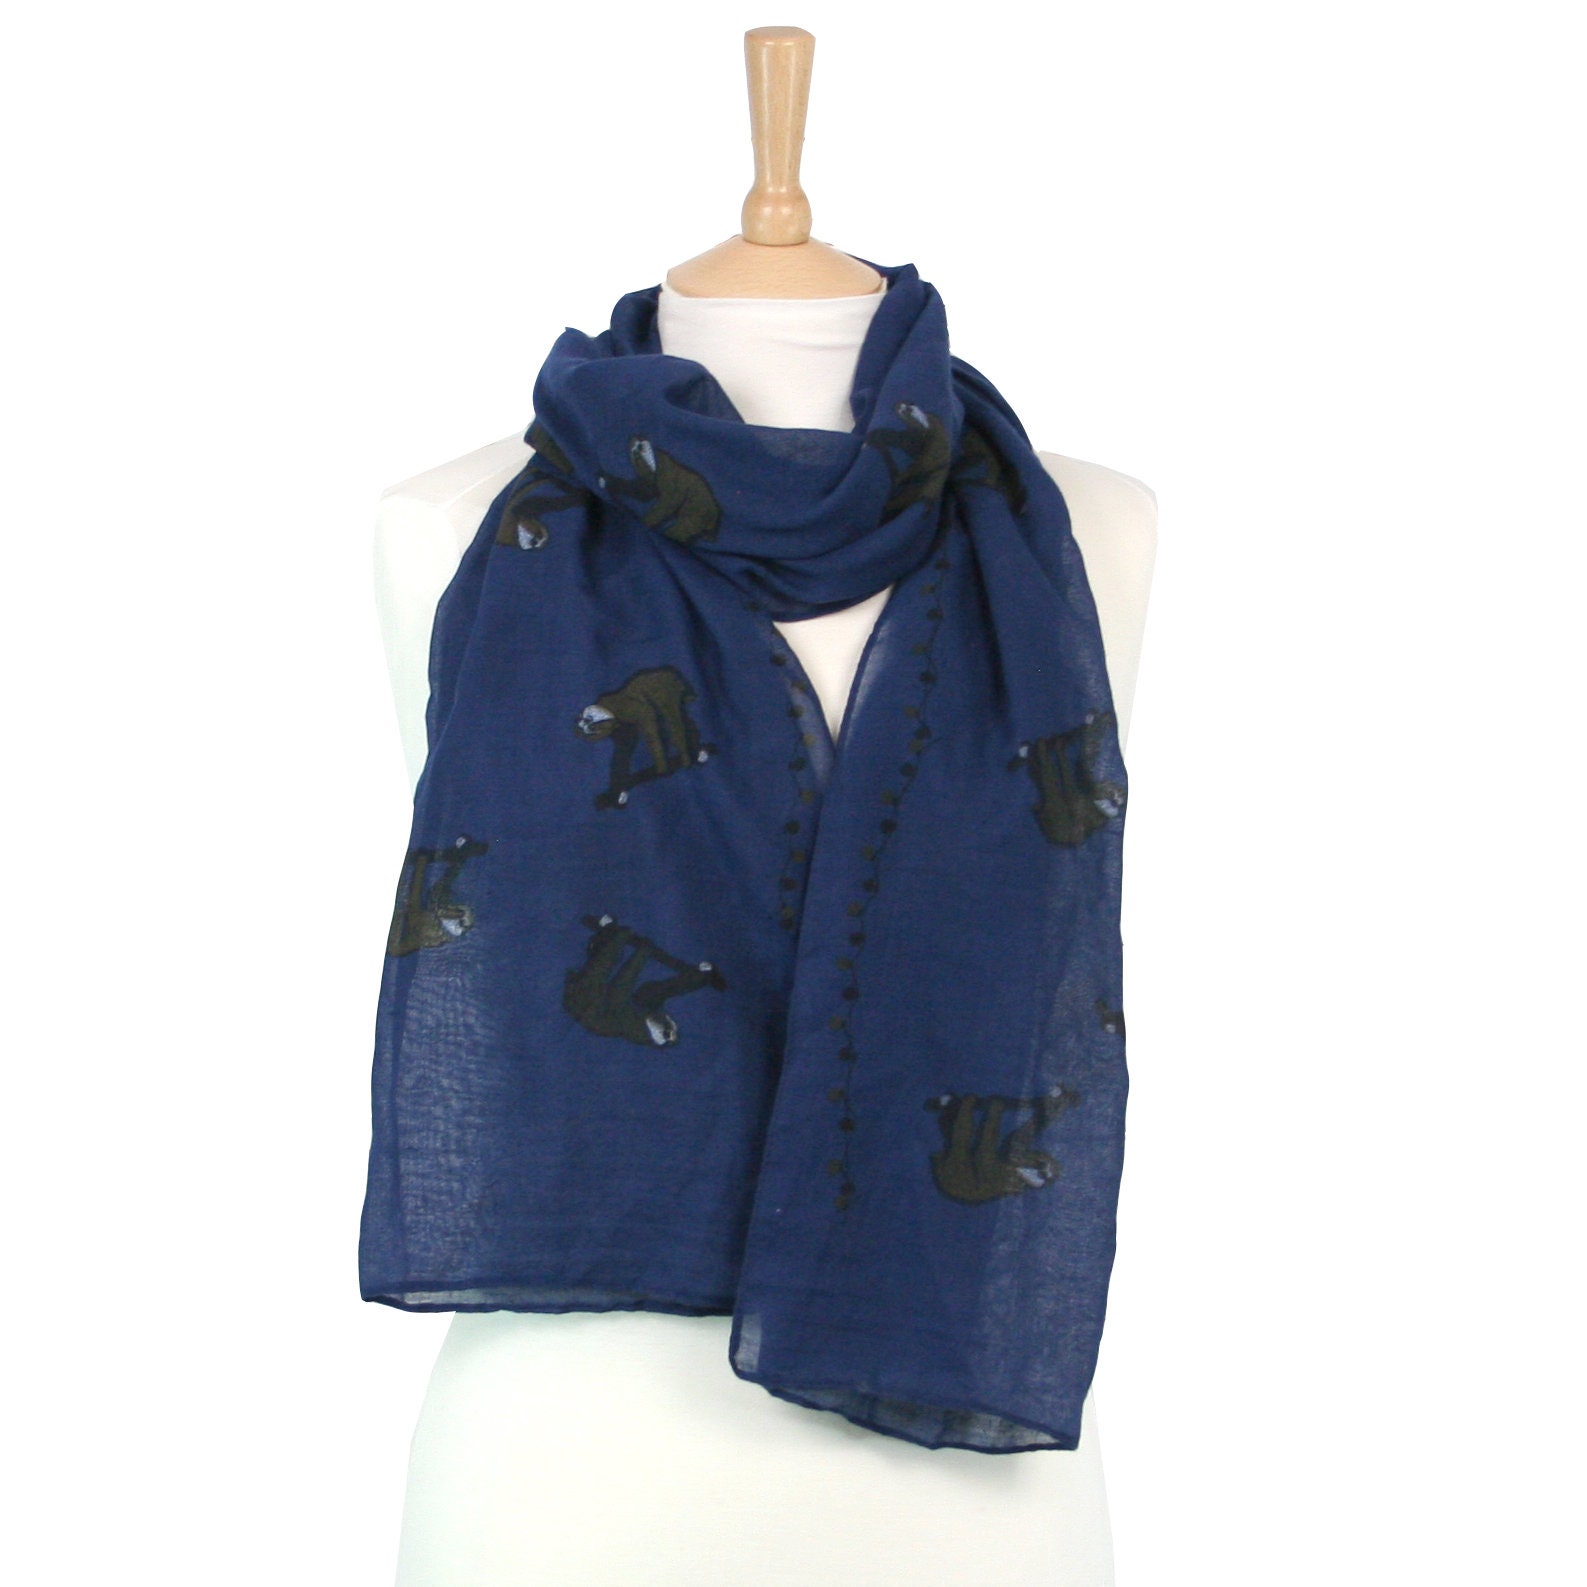 Perfect for an animal lover and for any special occasion Made of a soft polyester/Cotton blend THE SCARF GIRAFFE EXCLUSIVE womens sloth scarf with a fairy light design in a gift bag